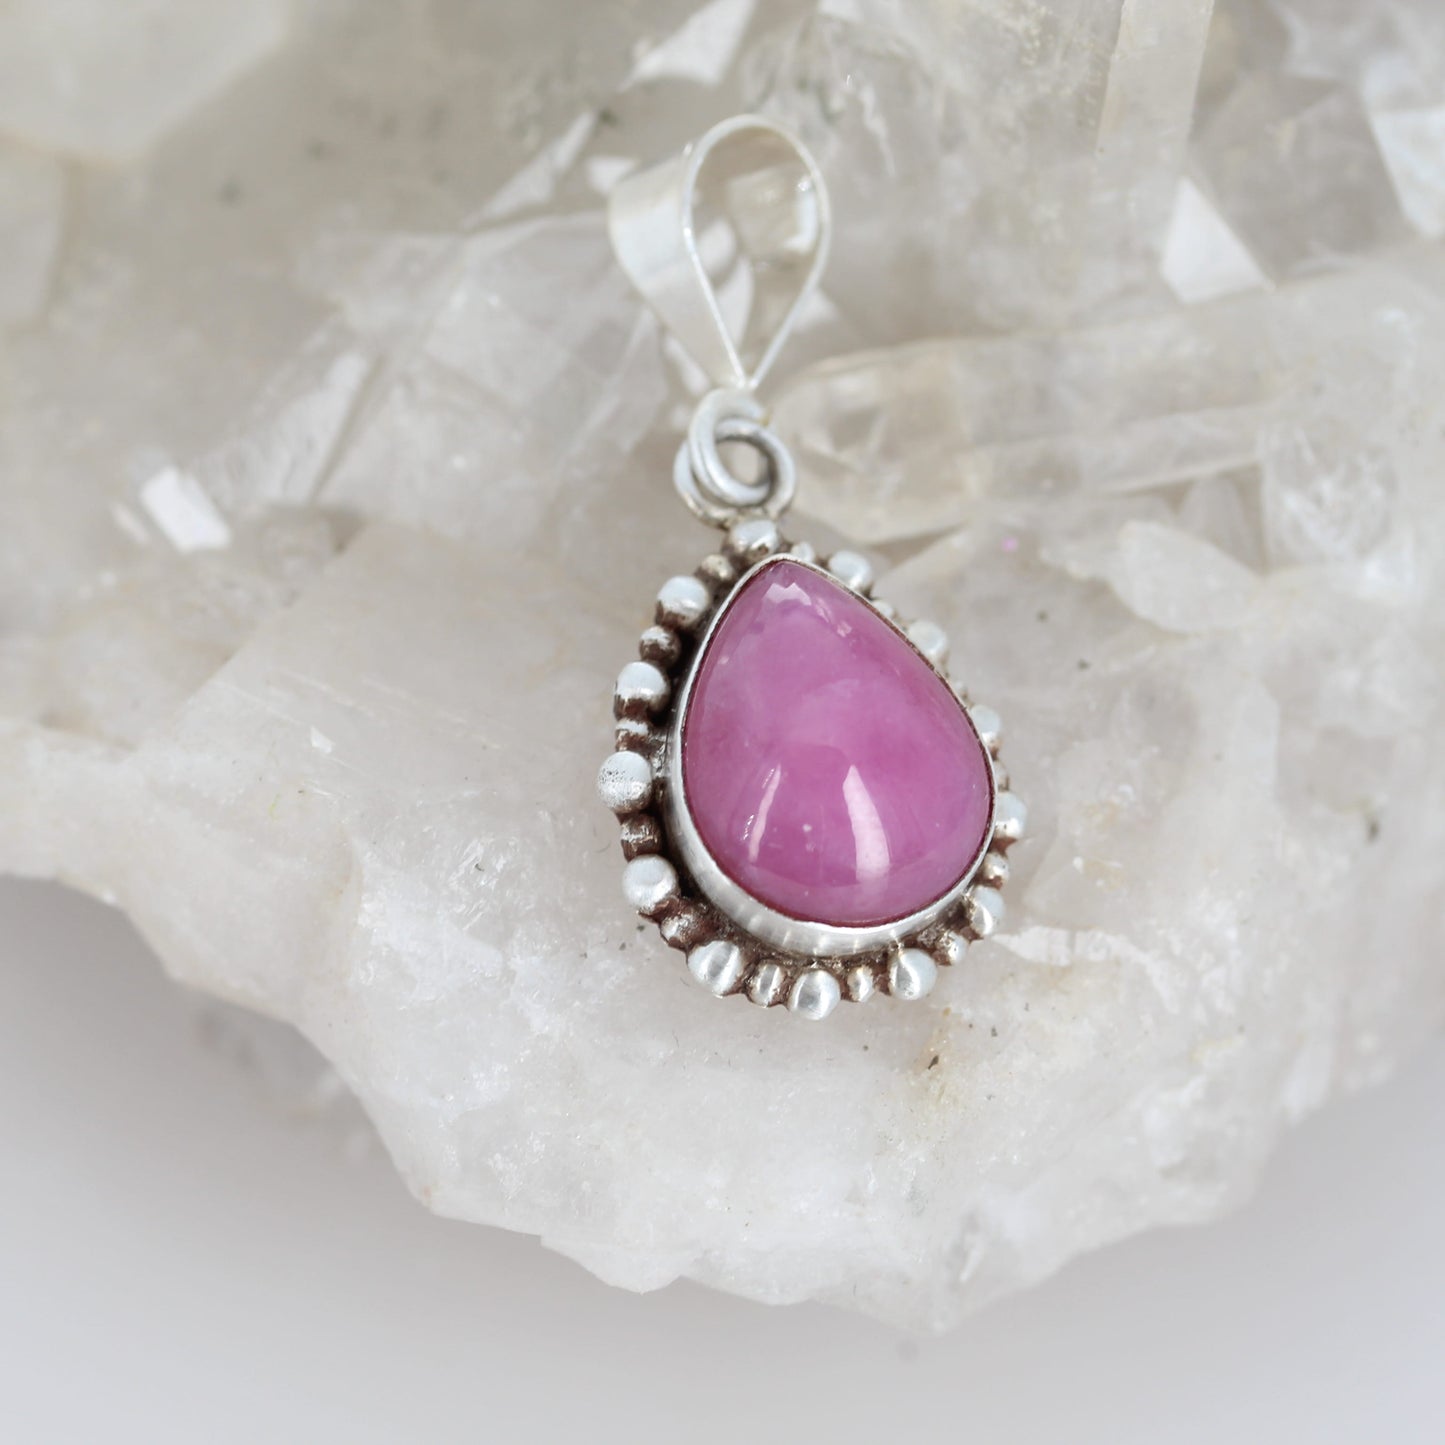 Vibrant Pink Genuine Ruby Pendant Necklace Sterling